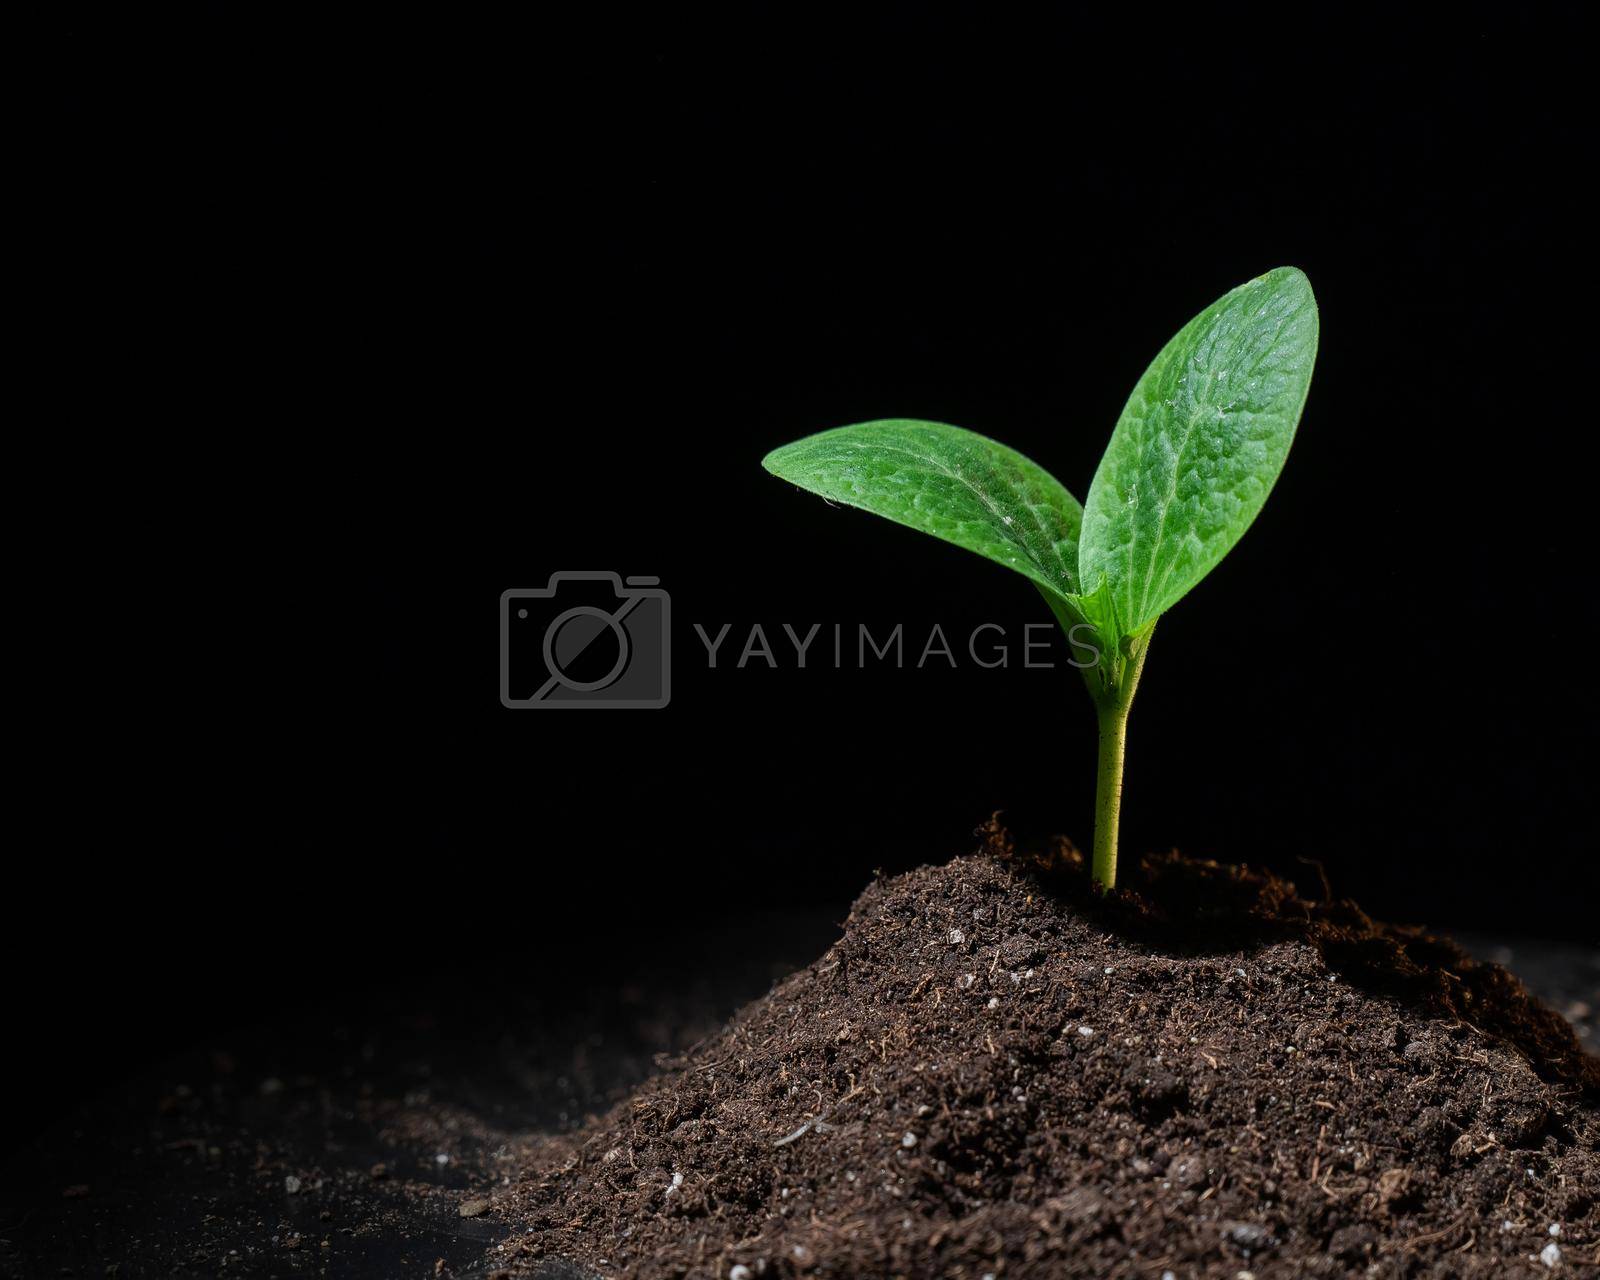 Royalty free image of Close-up of a sprout of zucchini on a black background. by mrwed54